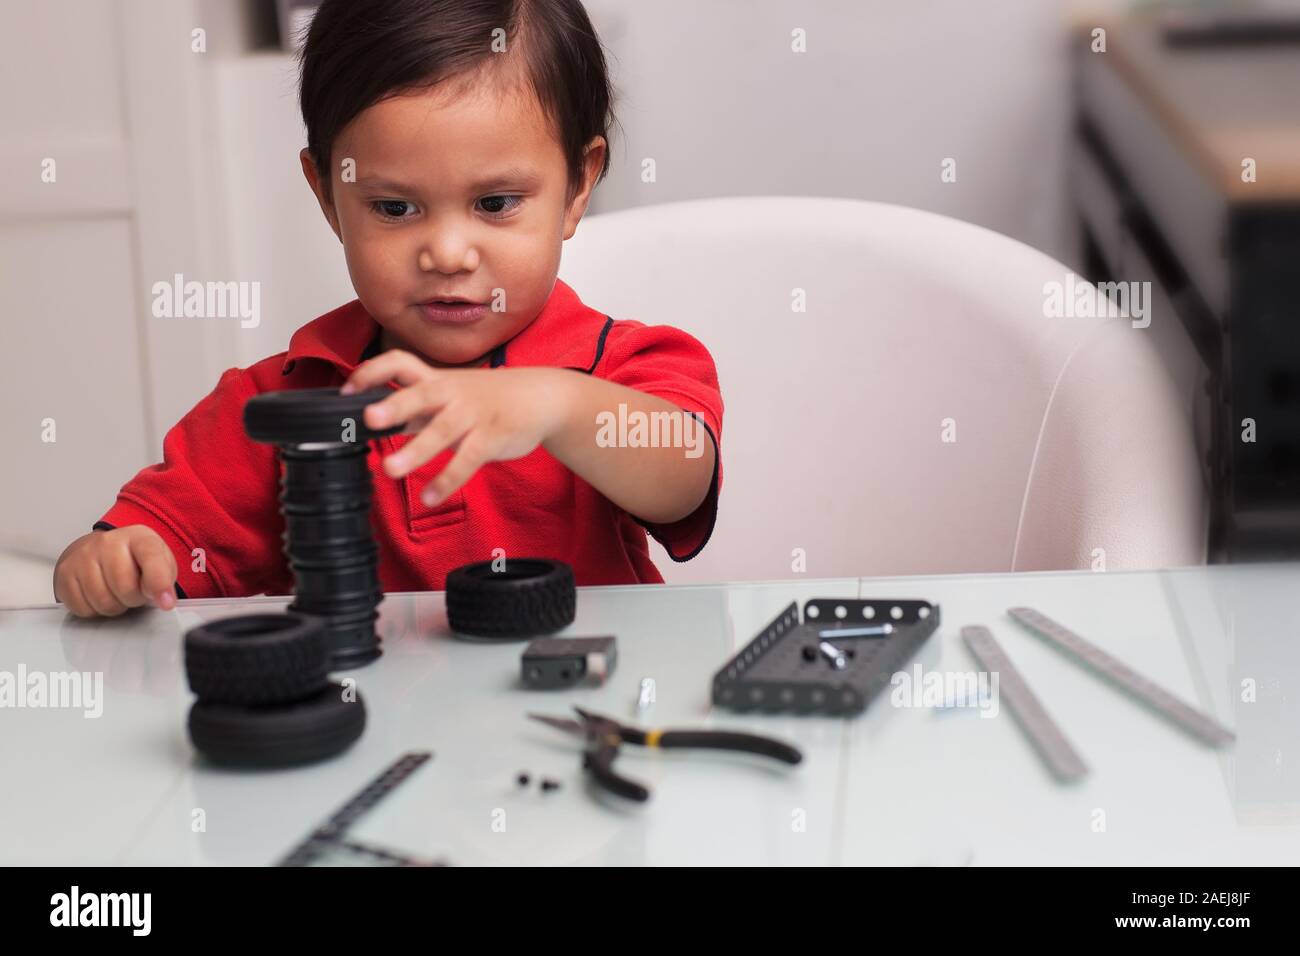 Three year old boy wearing a red shirt with fine motor skills is stacking toy tires on a glass desk with toy building parts. Stock Photo